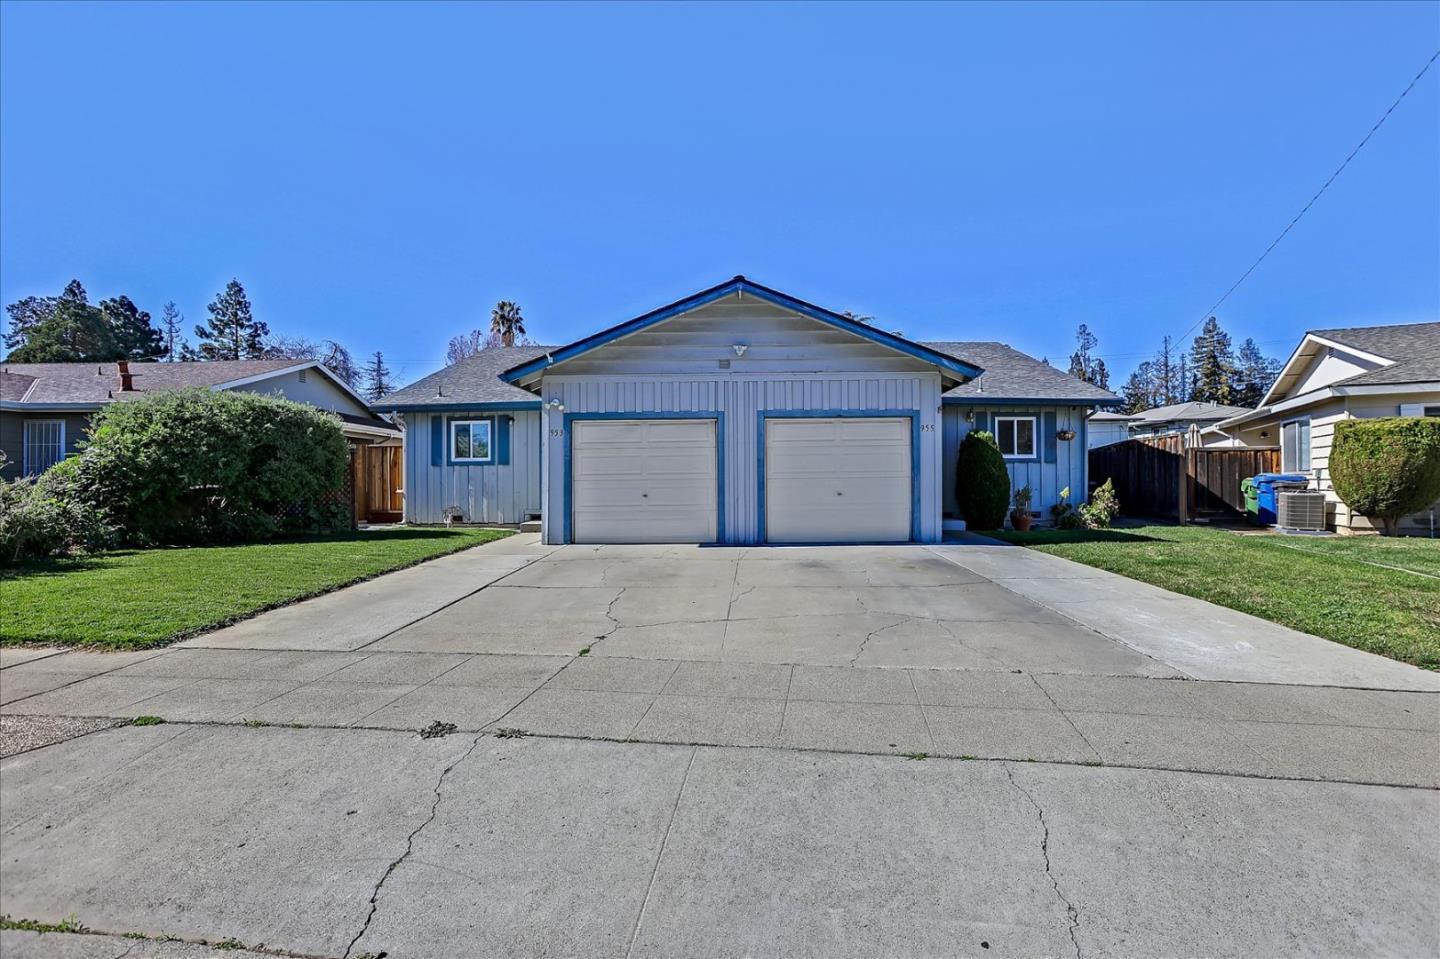 953 / 955 Whitehall AVE, CAMPBELL, CA 95008